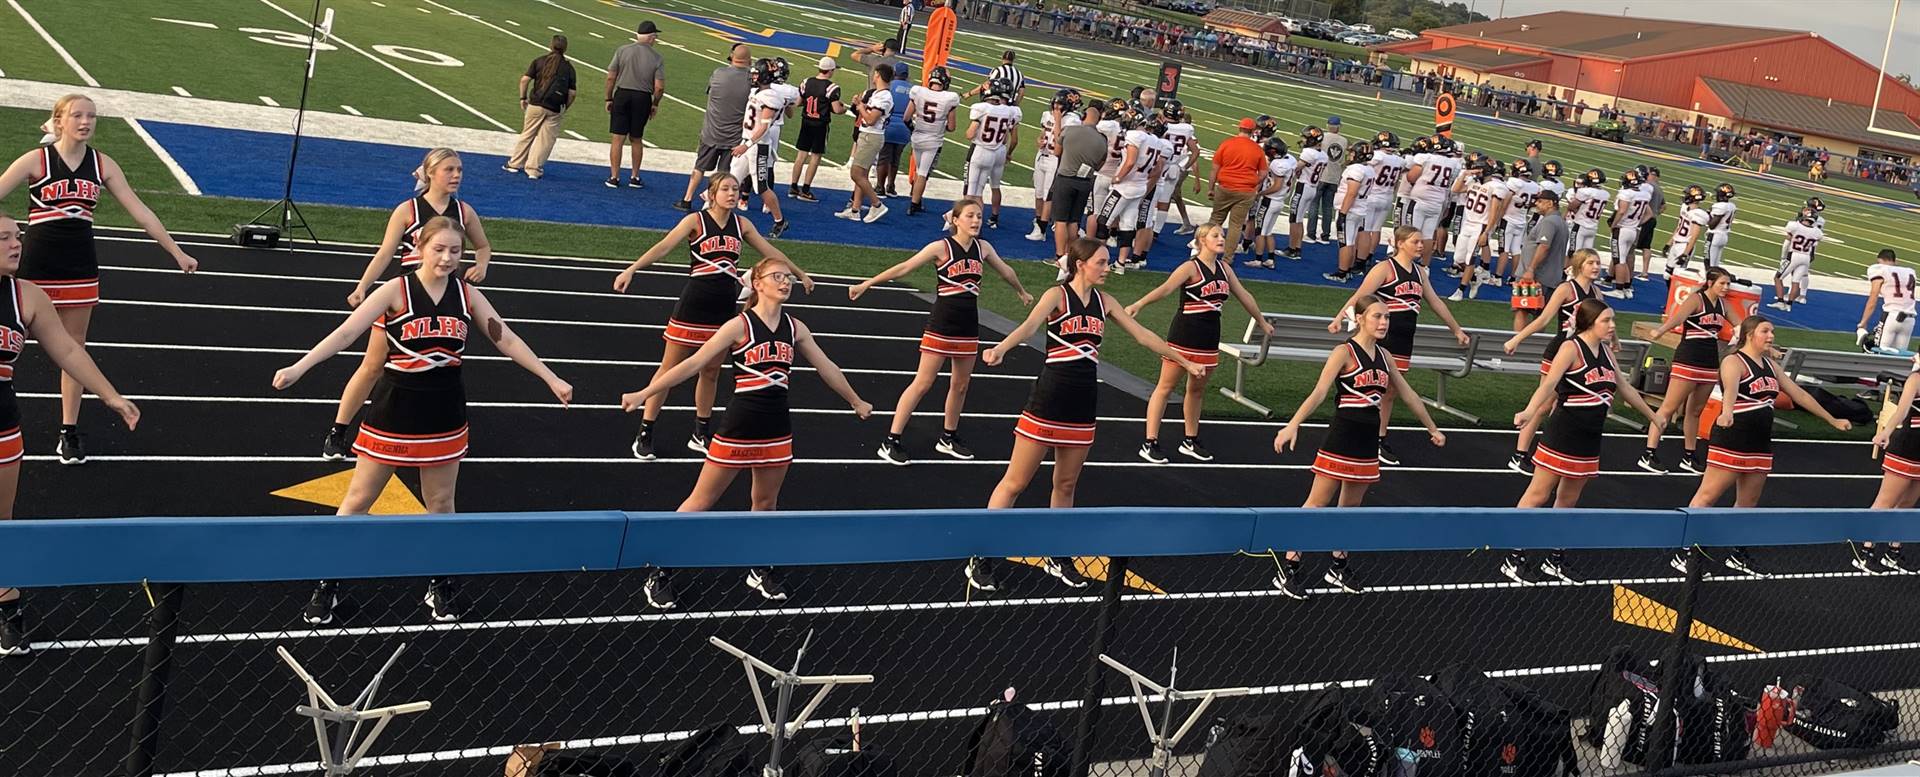 Cheerleaders at the Maysville Game